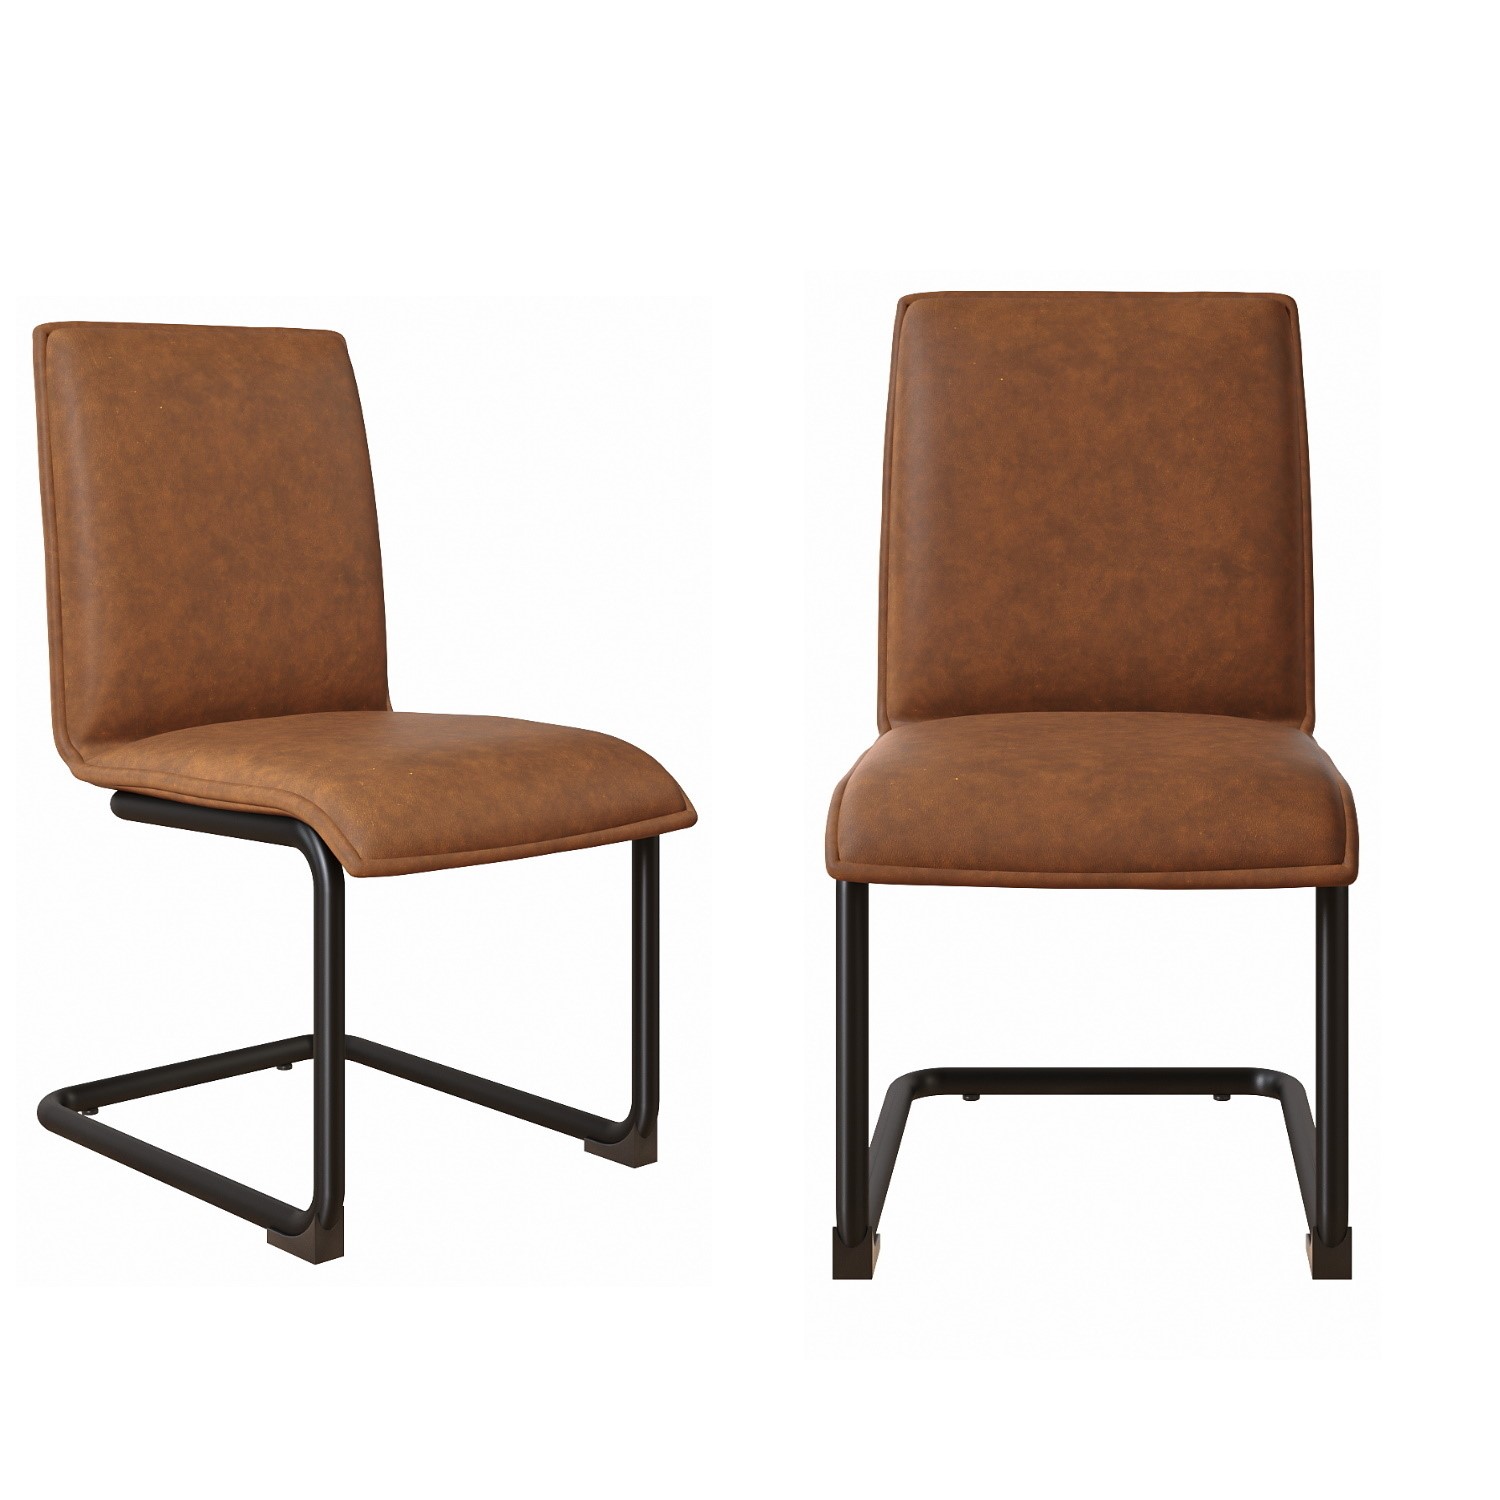 Photo of Set of 2 faux leather cantilever tan dining chairs - lucas